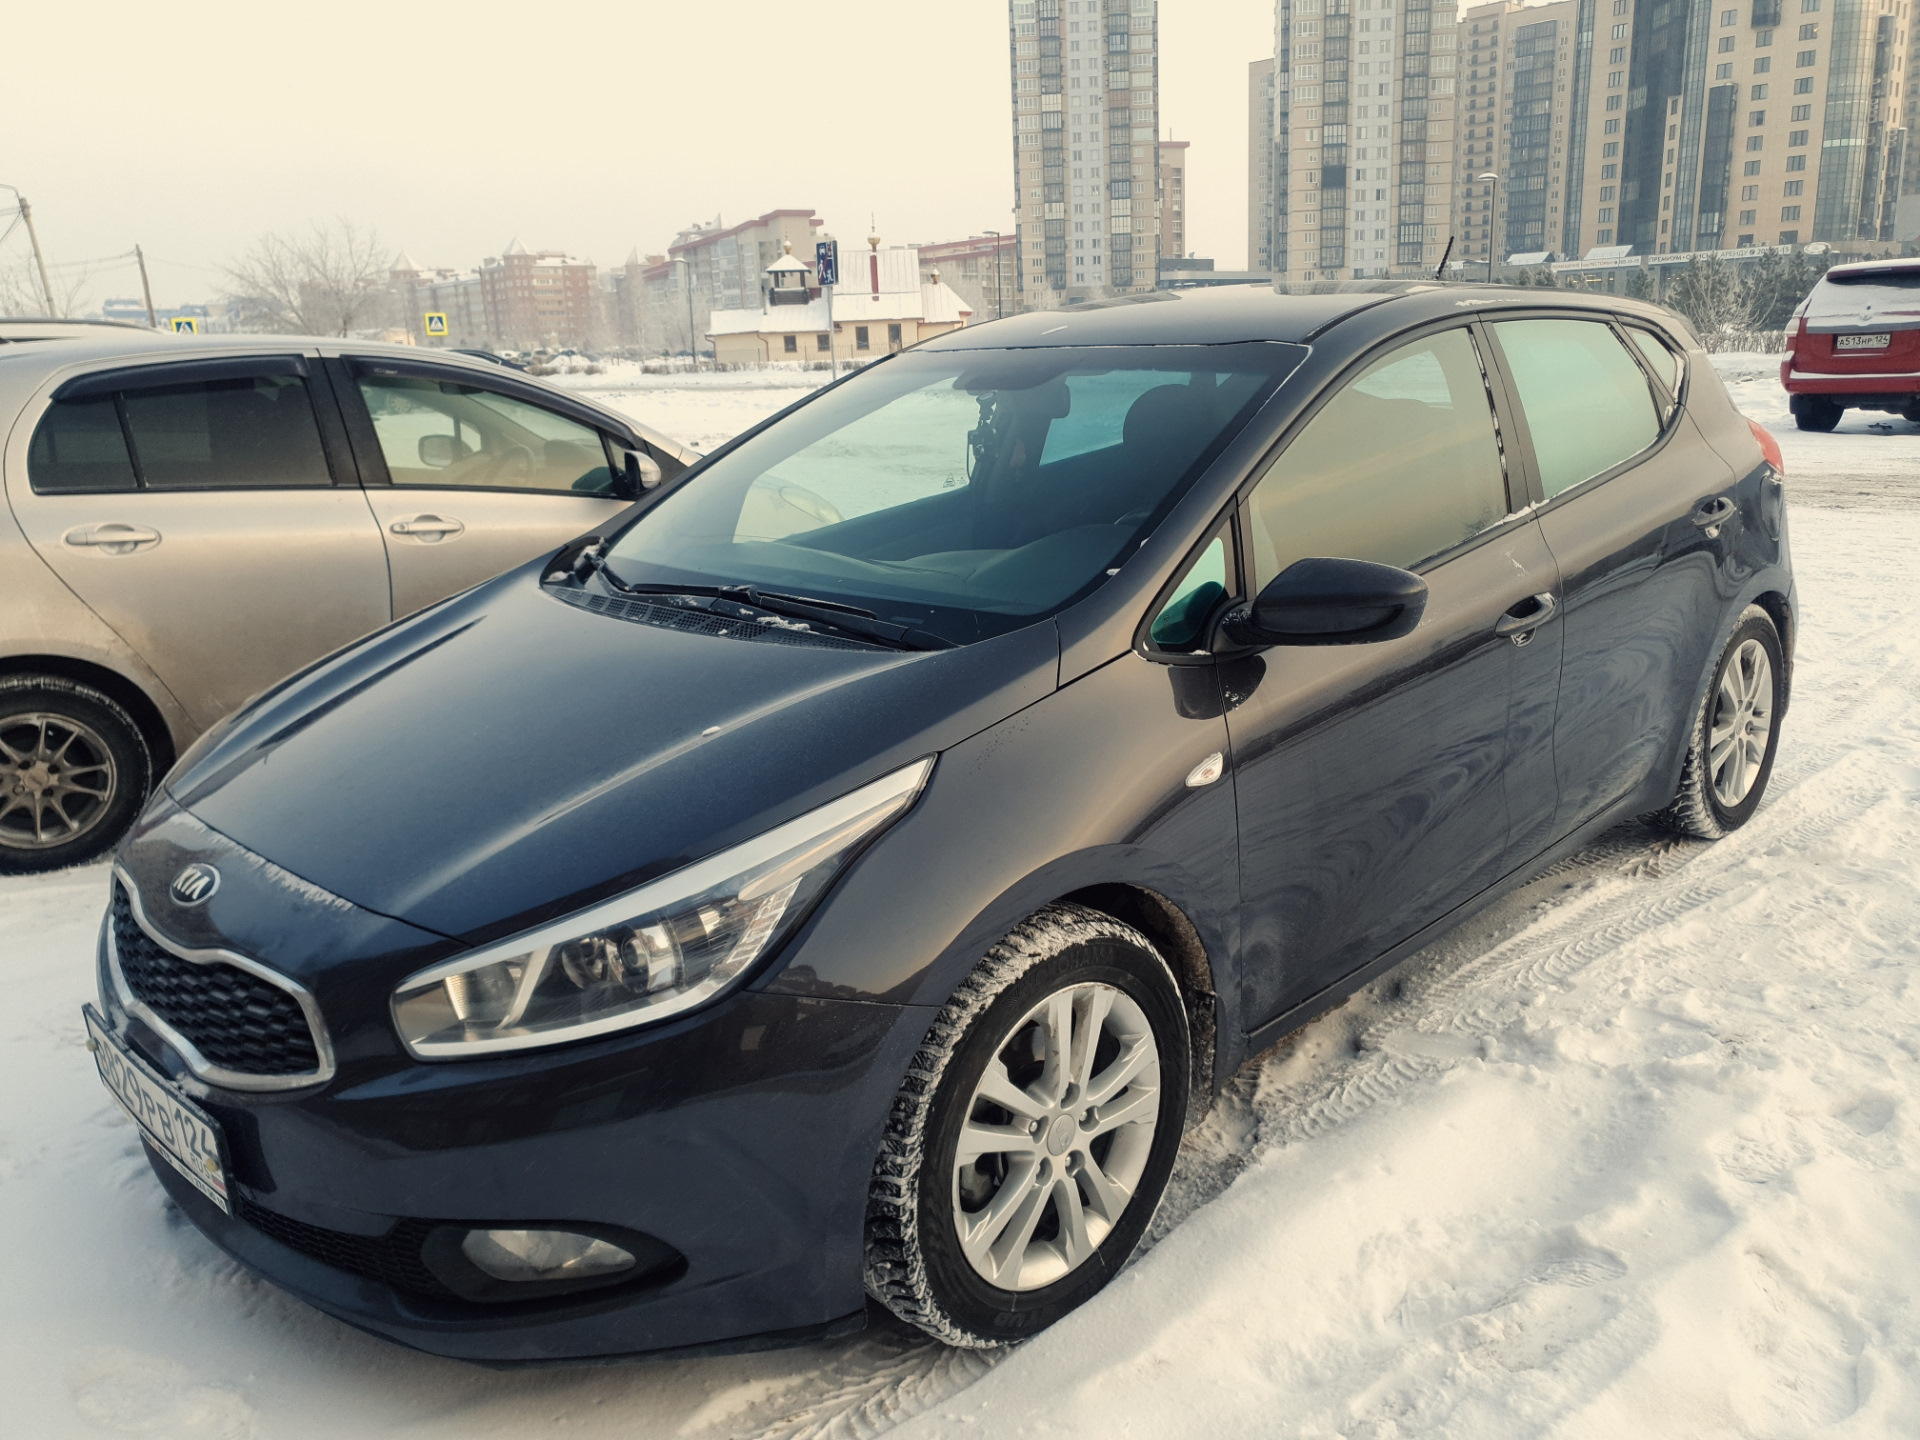 Сид продажа. Kia Ceed Luxe 1.6 at. Kia Ceed Luxe 1.6 at Blue Flame.